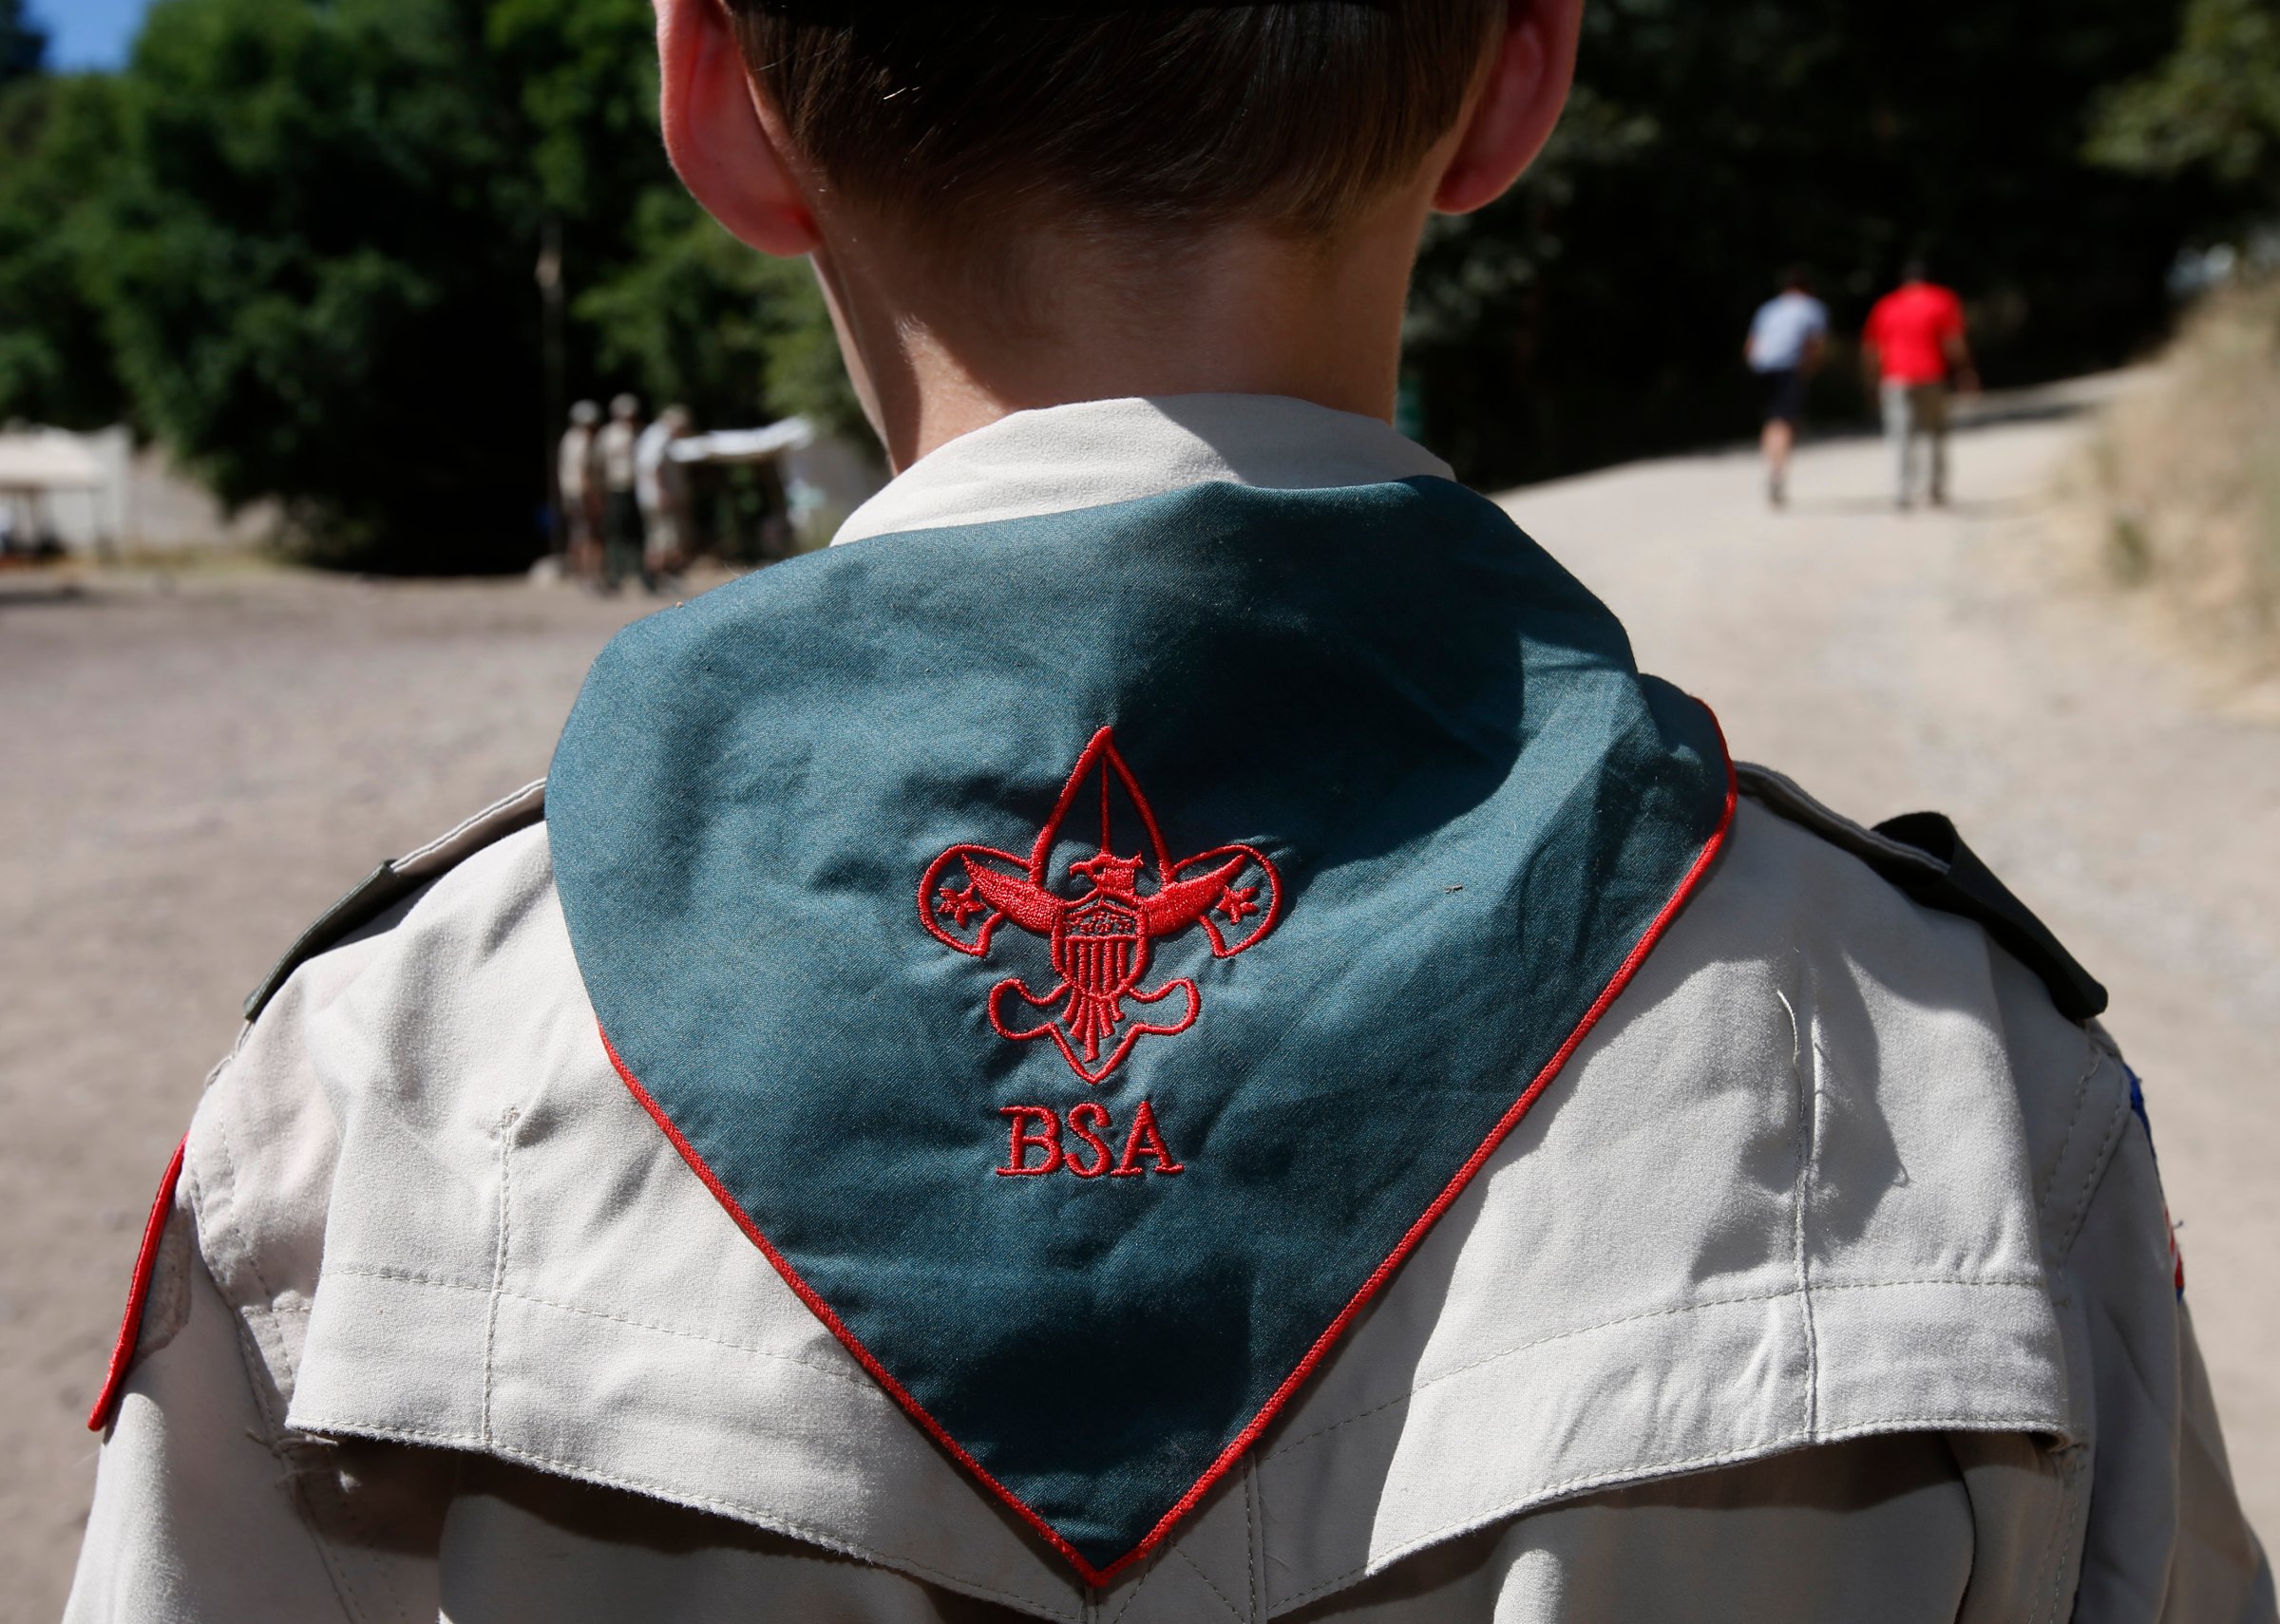 Mormon Church Considers Pulling Out Of Boy Scouts Over Their Decision To Allow Gay Leaders